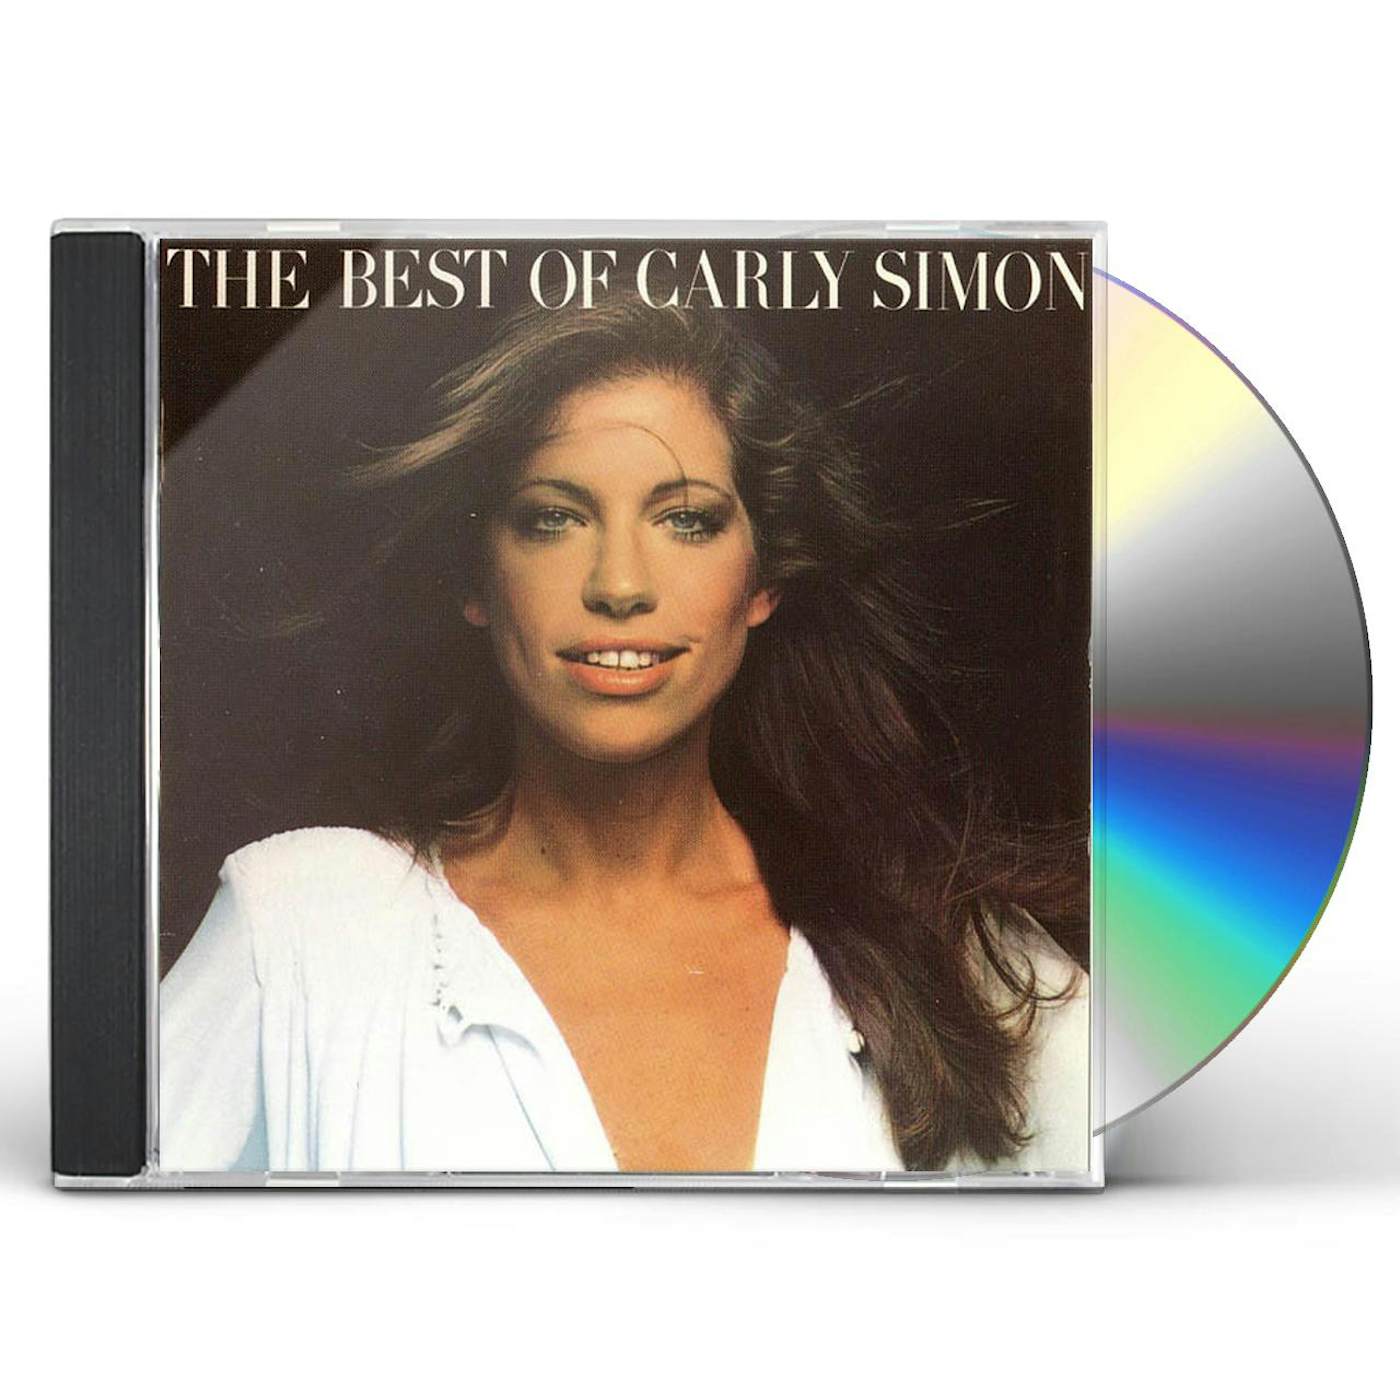 BEST OF CARLY SIMON CD